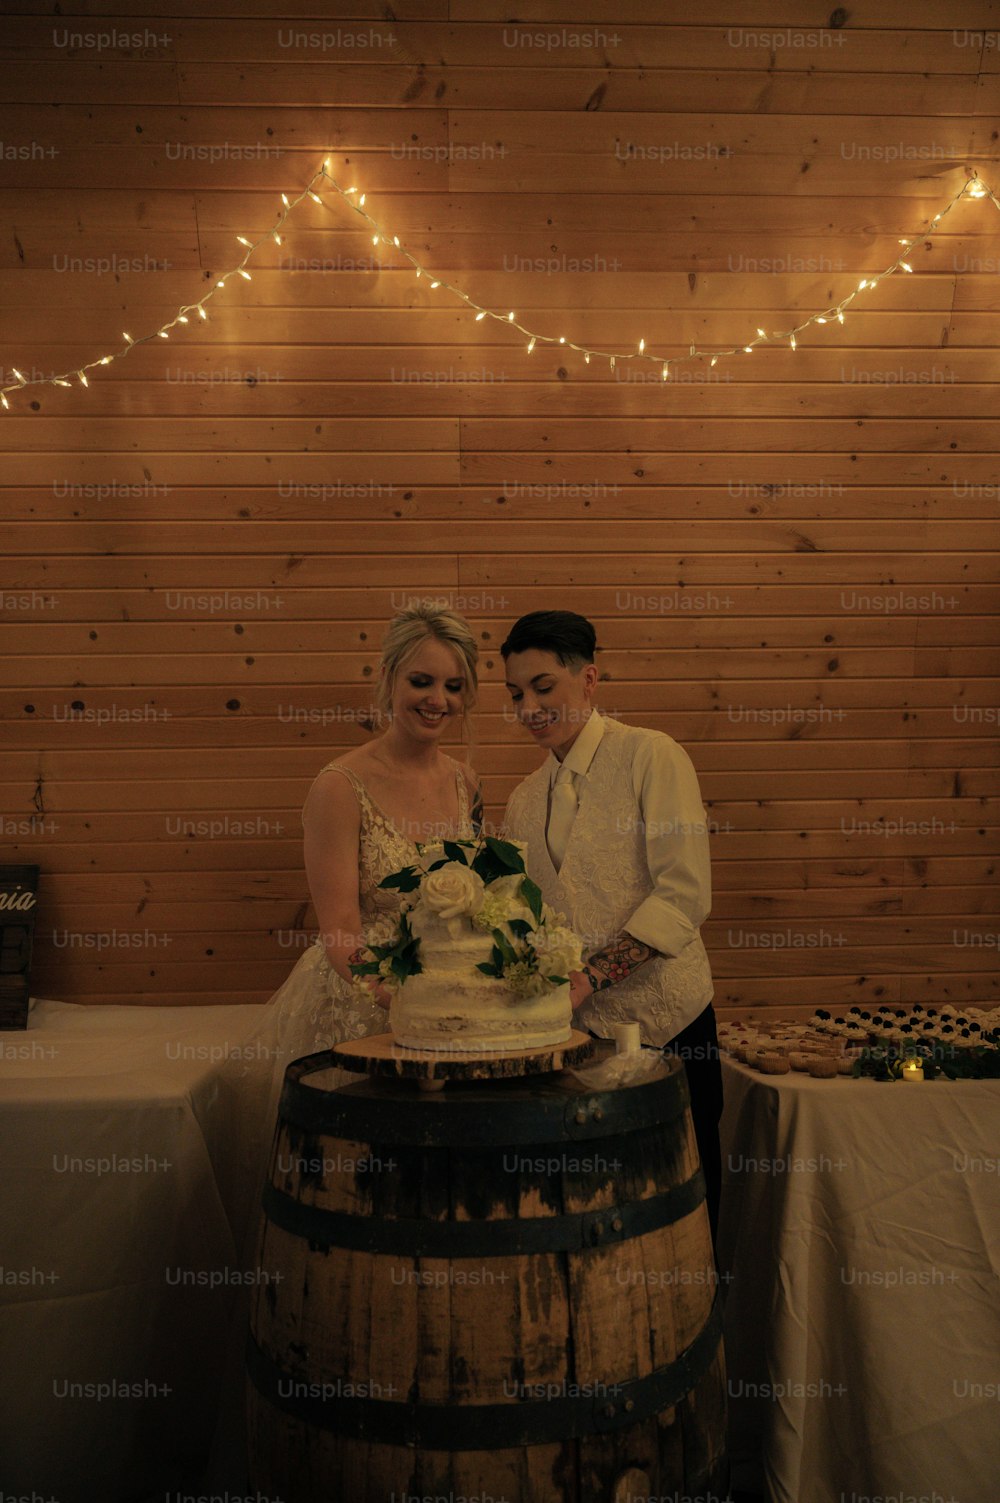 a man and woman standing next to a barrel with a cake on it